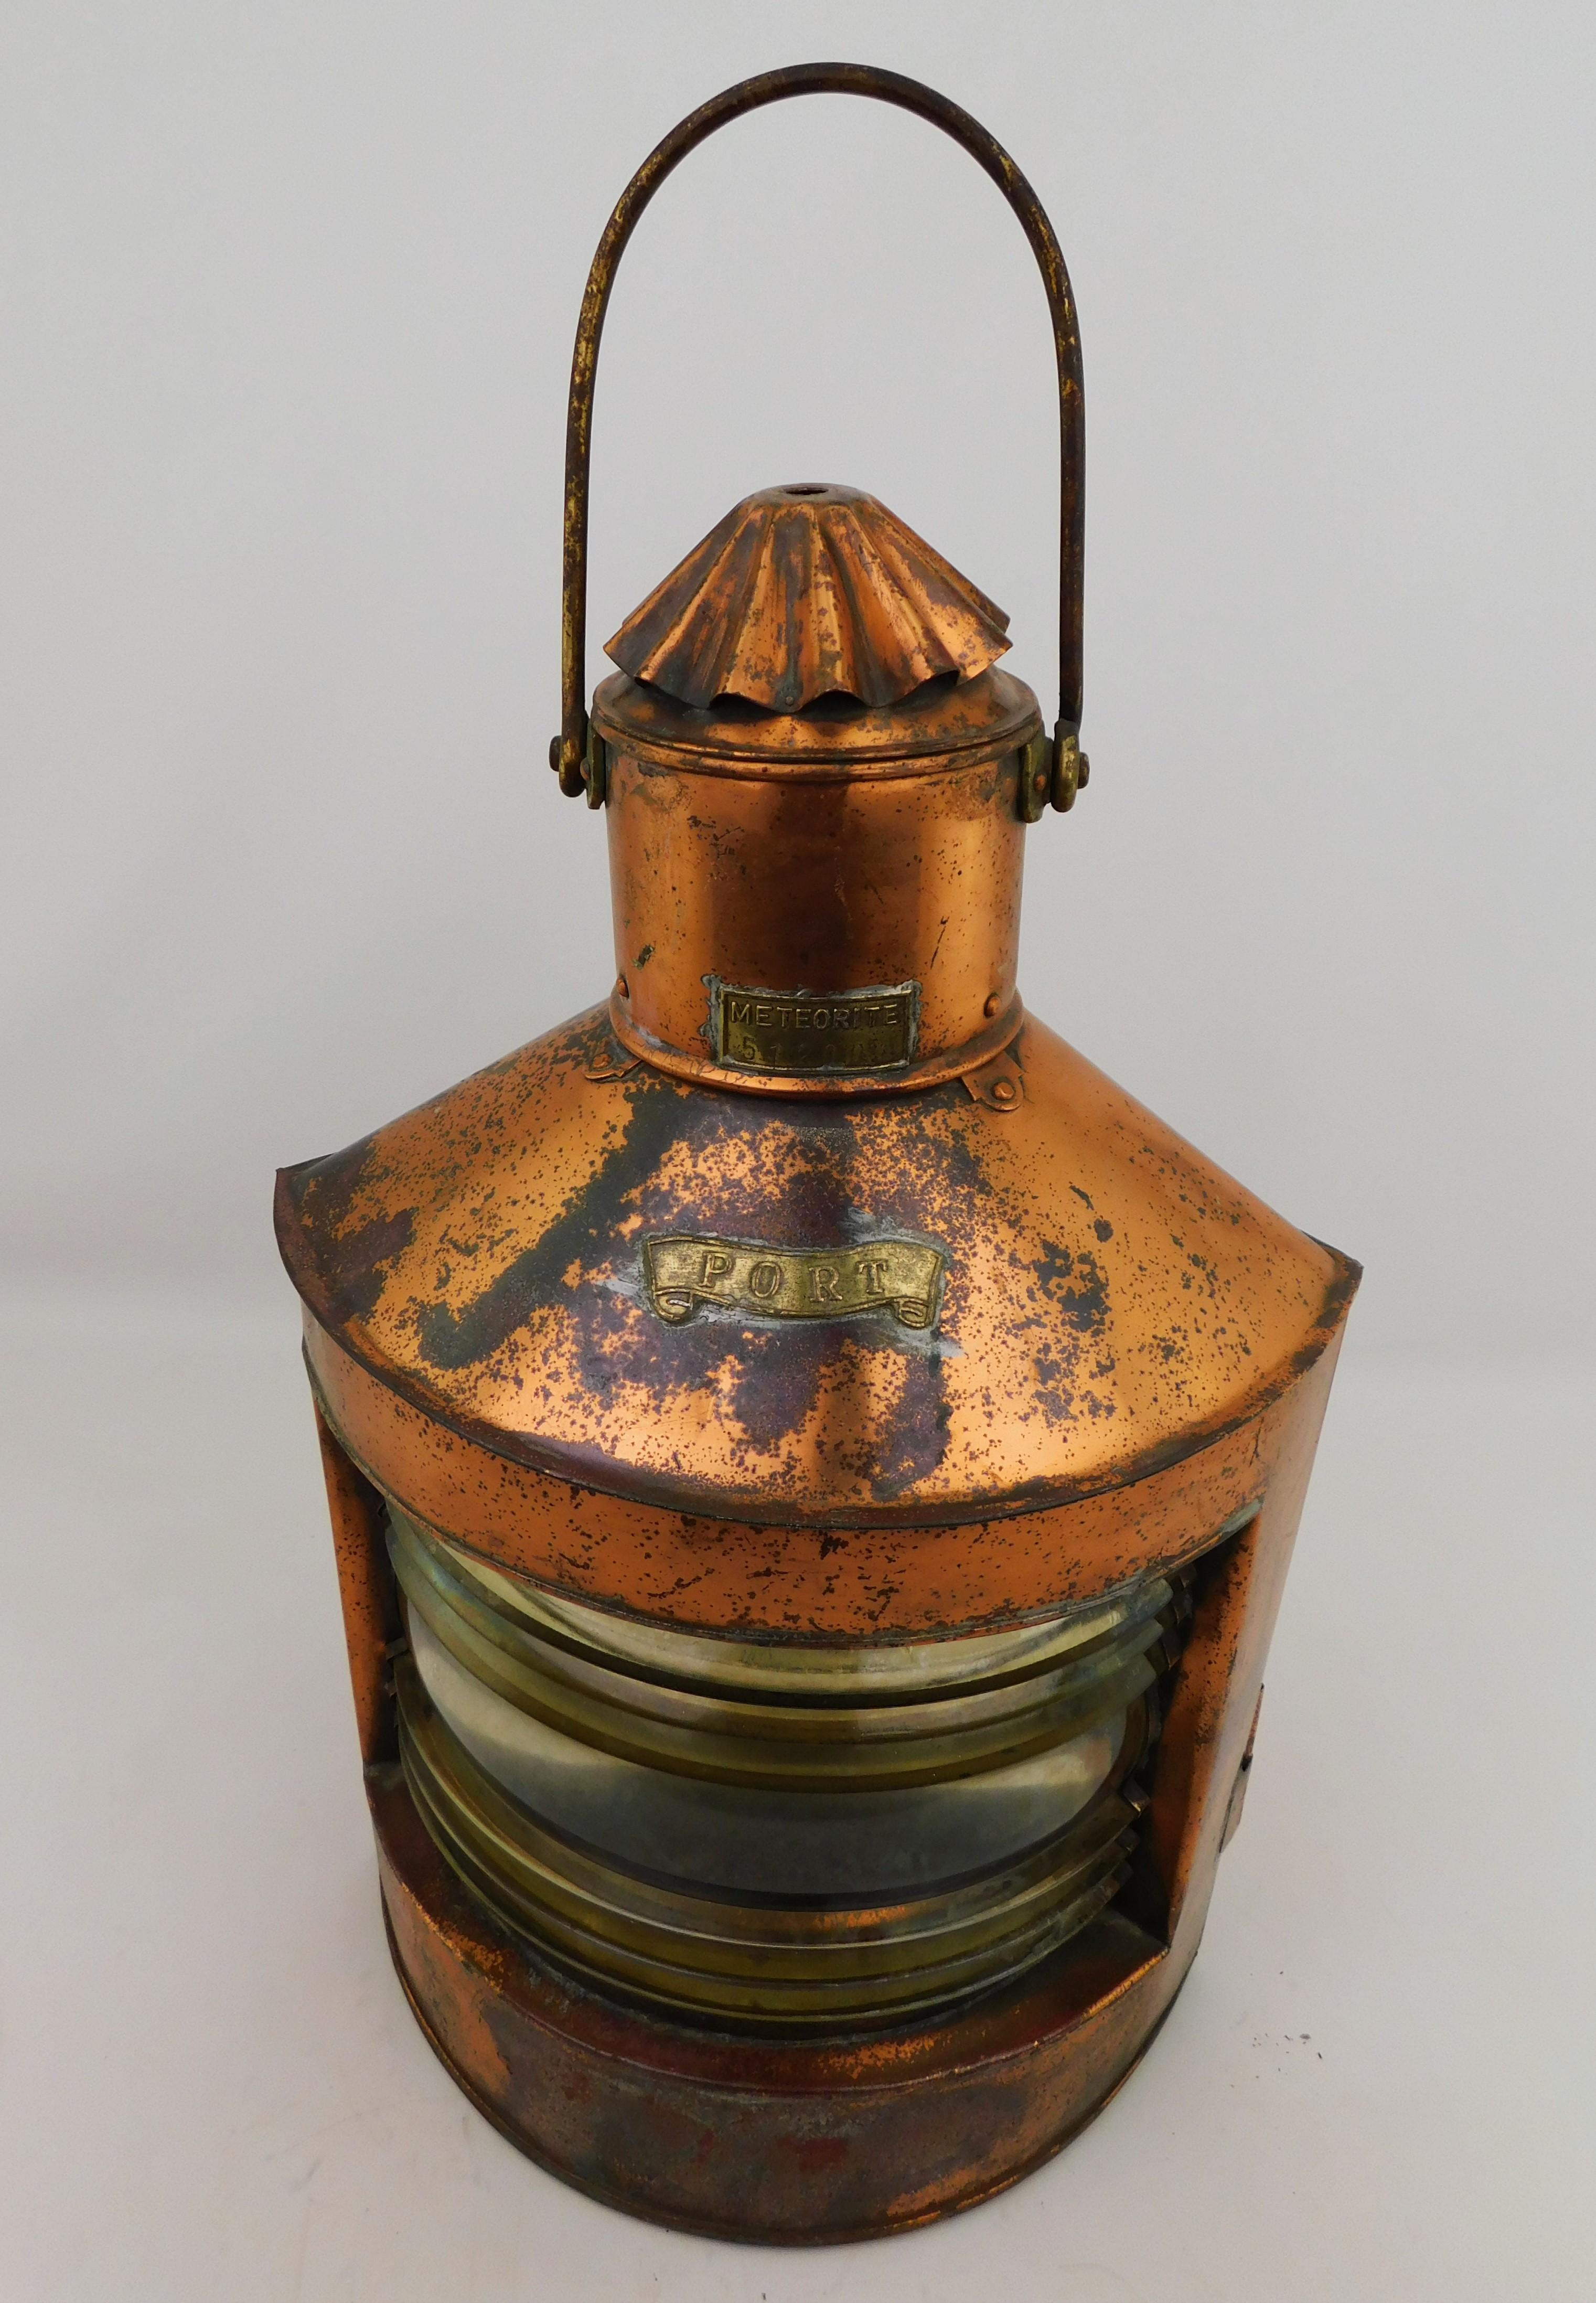 Large Copper and Brass Ship's Port Lantern Light by Meteorite Birmingham England For Sale 6